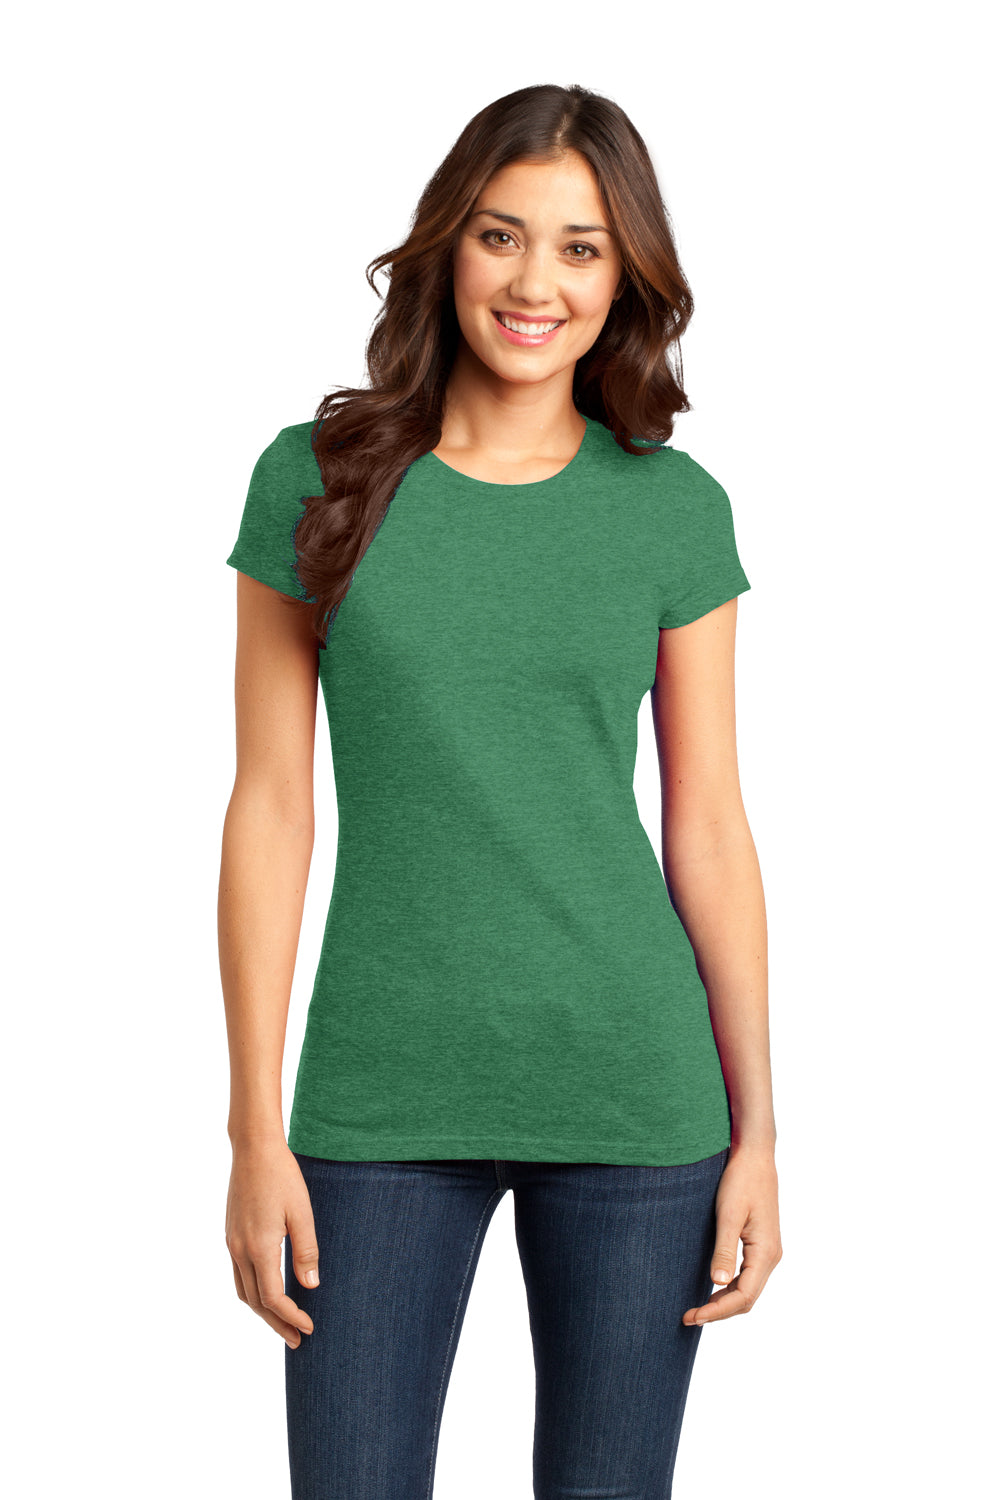 District DT6001 Womens Very Important Short Sleeve Crewneck T-Shirt Heather Kelly Green Front